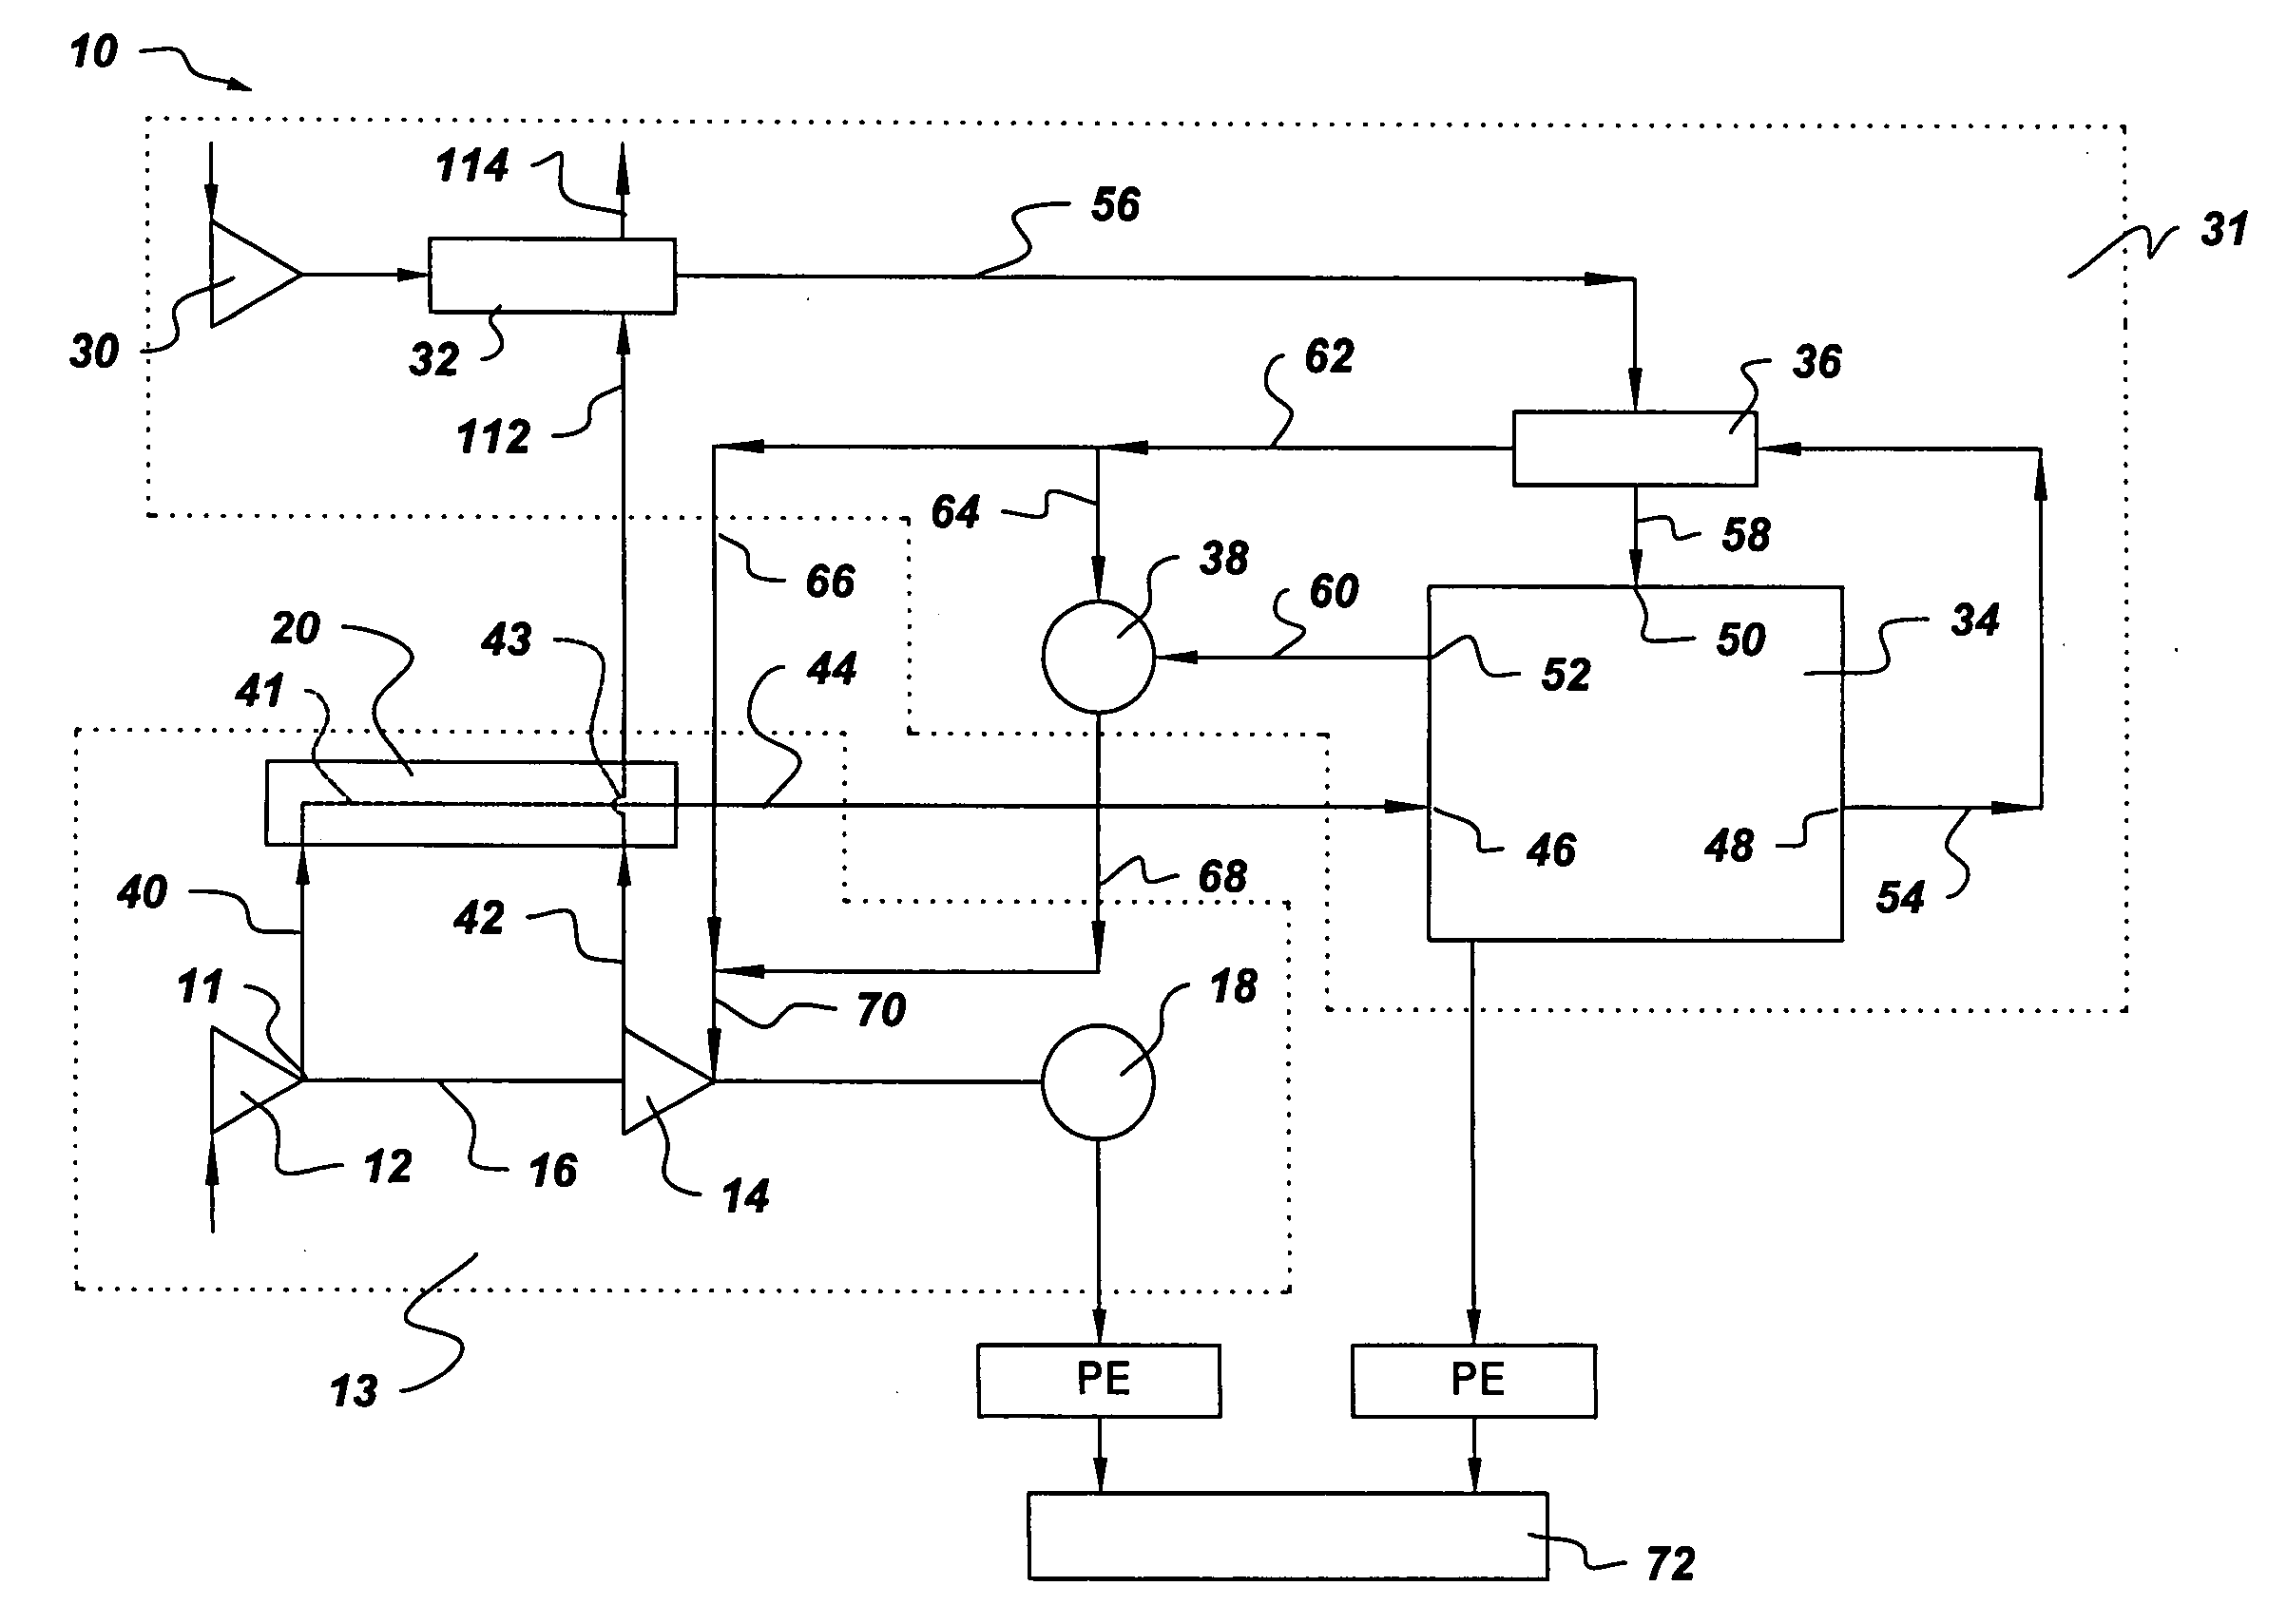 Integrated fuel cell hybrid power plant with controlled oxidant flow for combustion of spent fuel